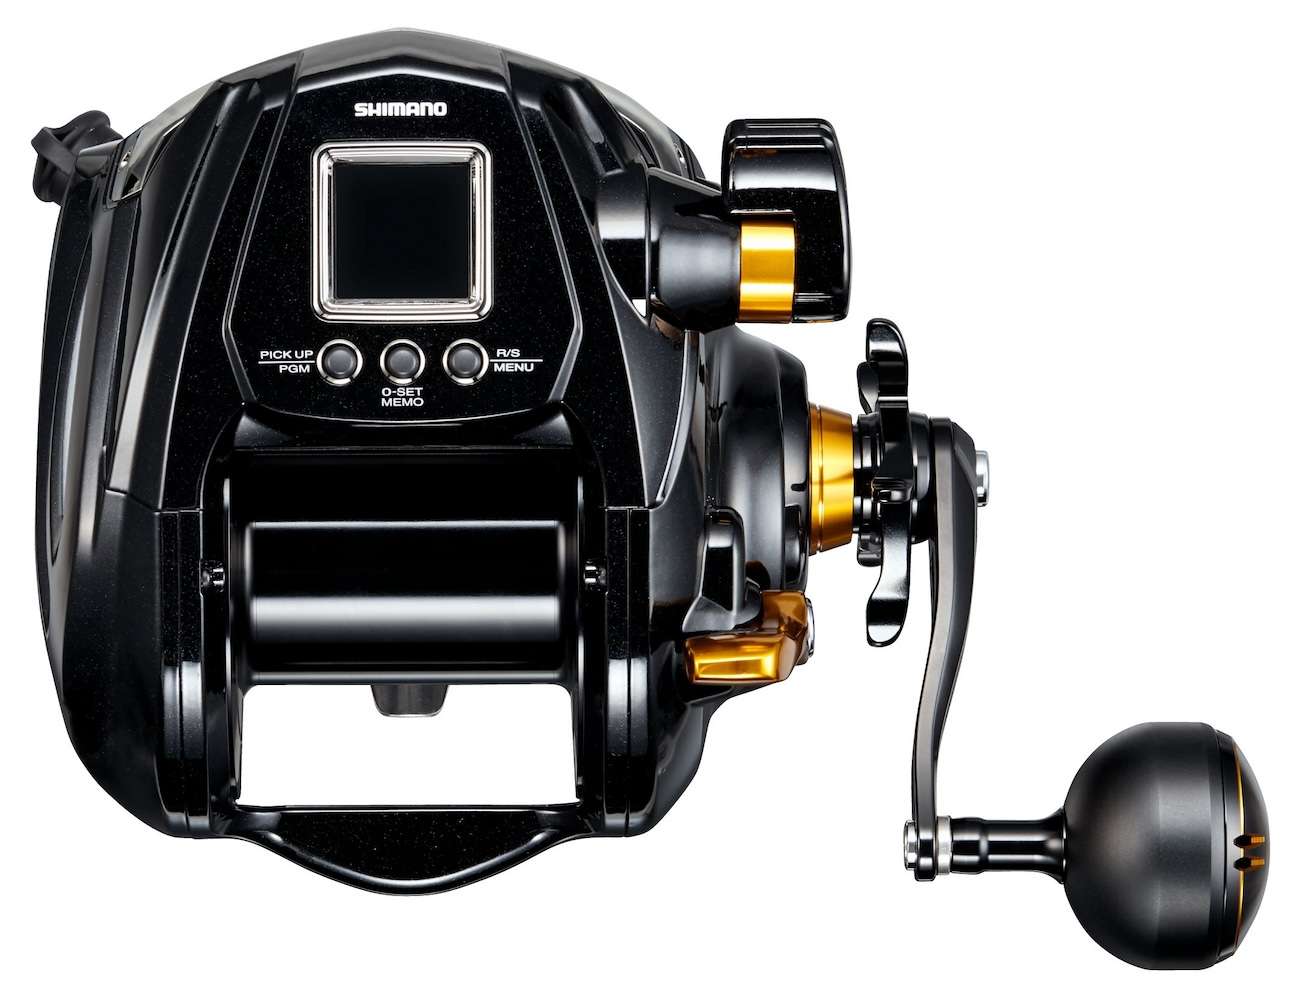 New Specialized Electric Fishing Reel Lithium Battery.14.8V 296WH. Compatible with Daiwa & Shimano Electric Reels. (with Two USB Ports and Carrying